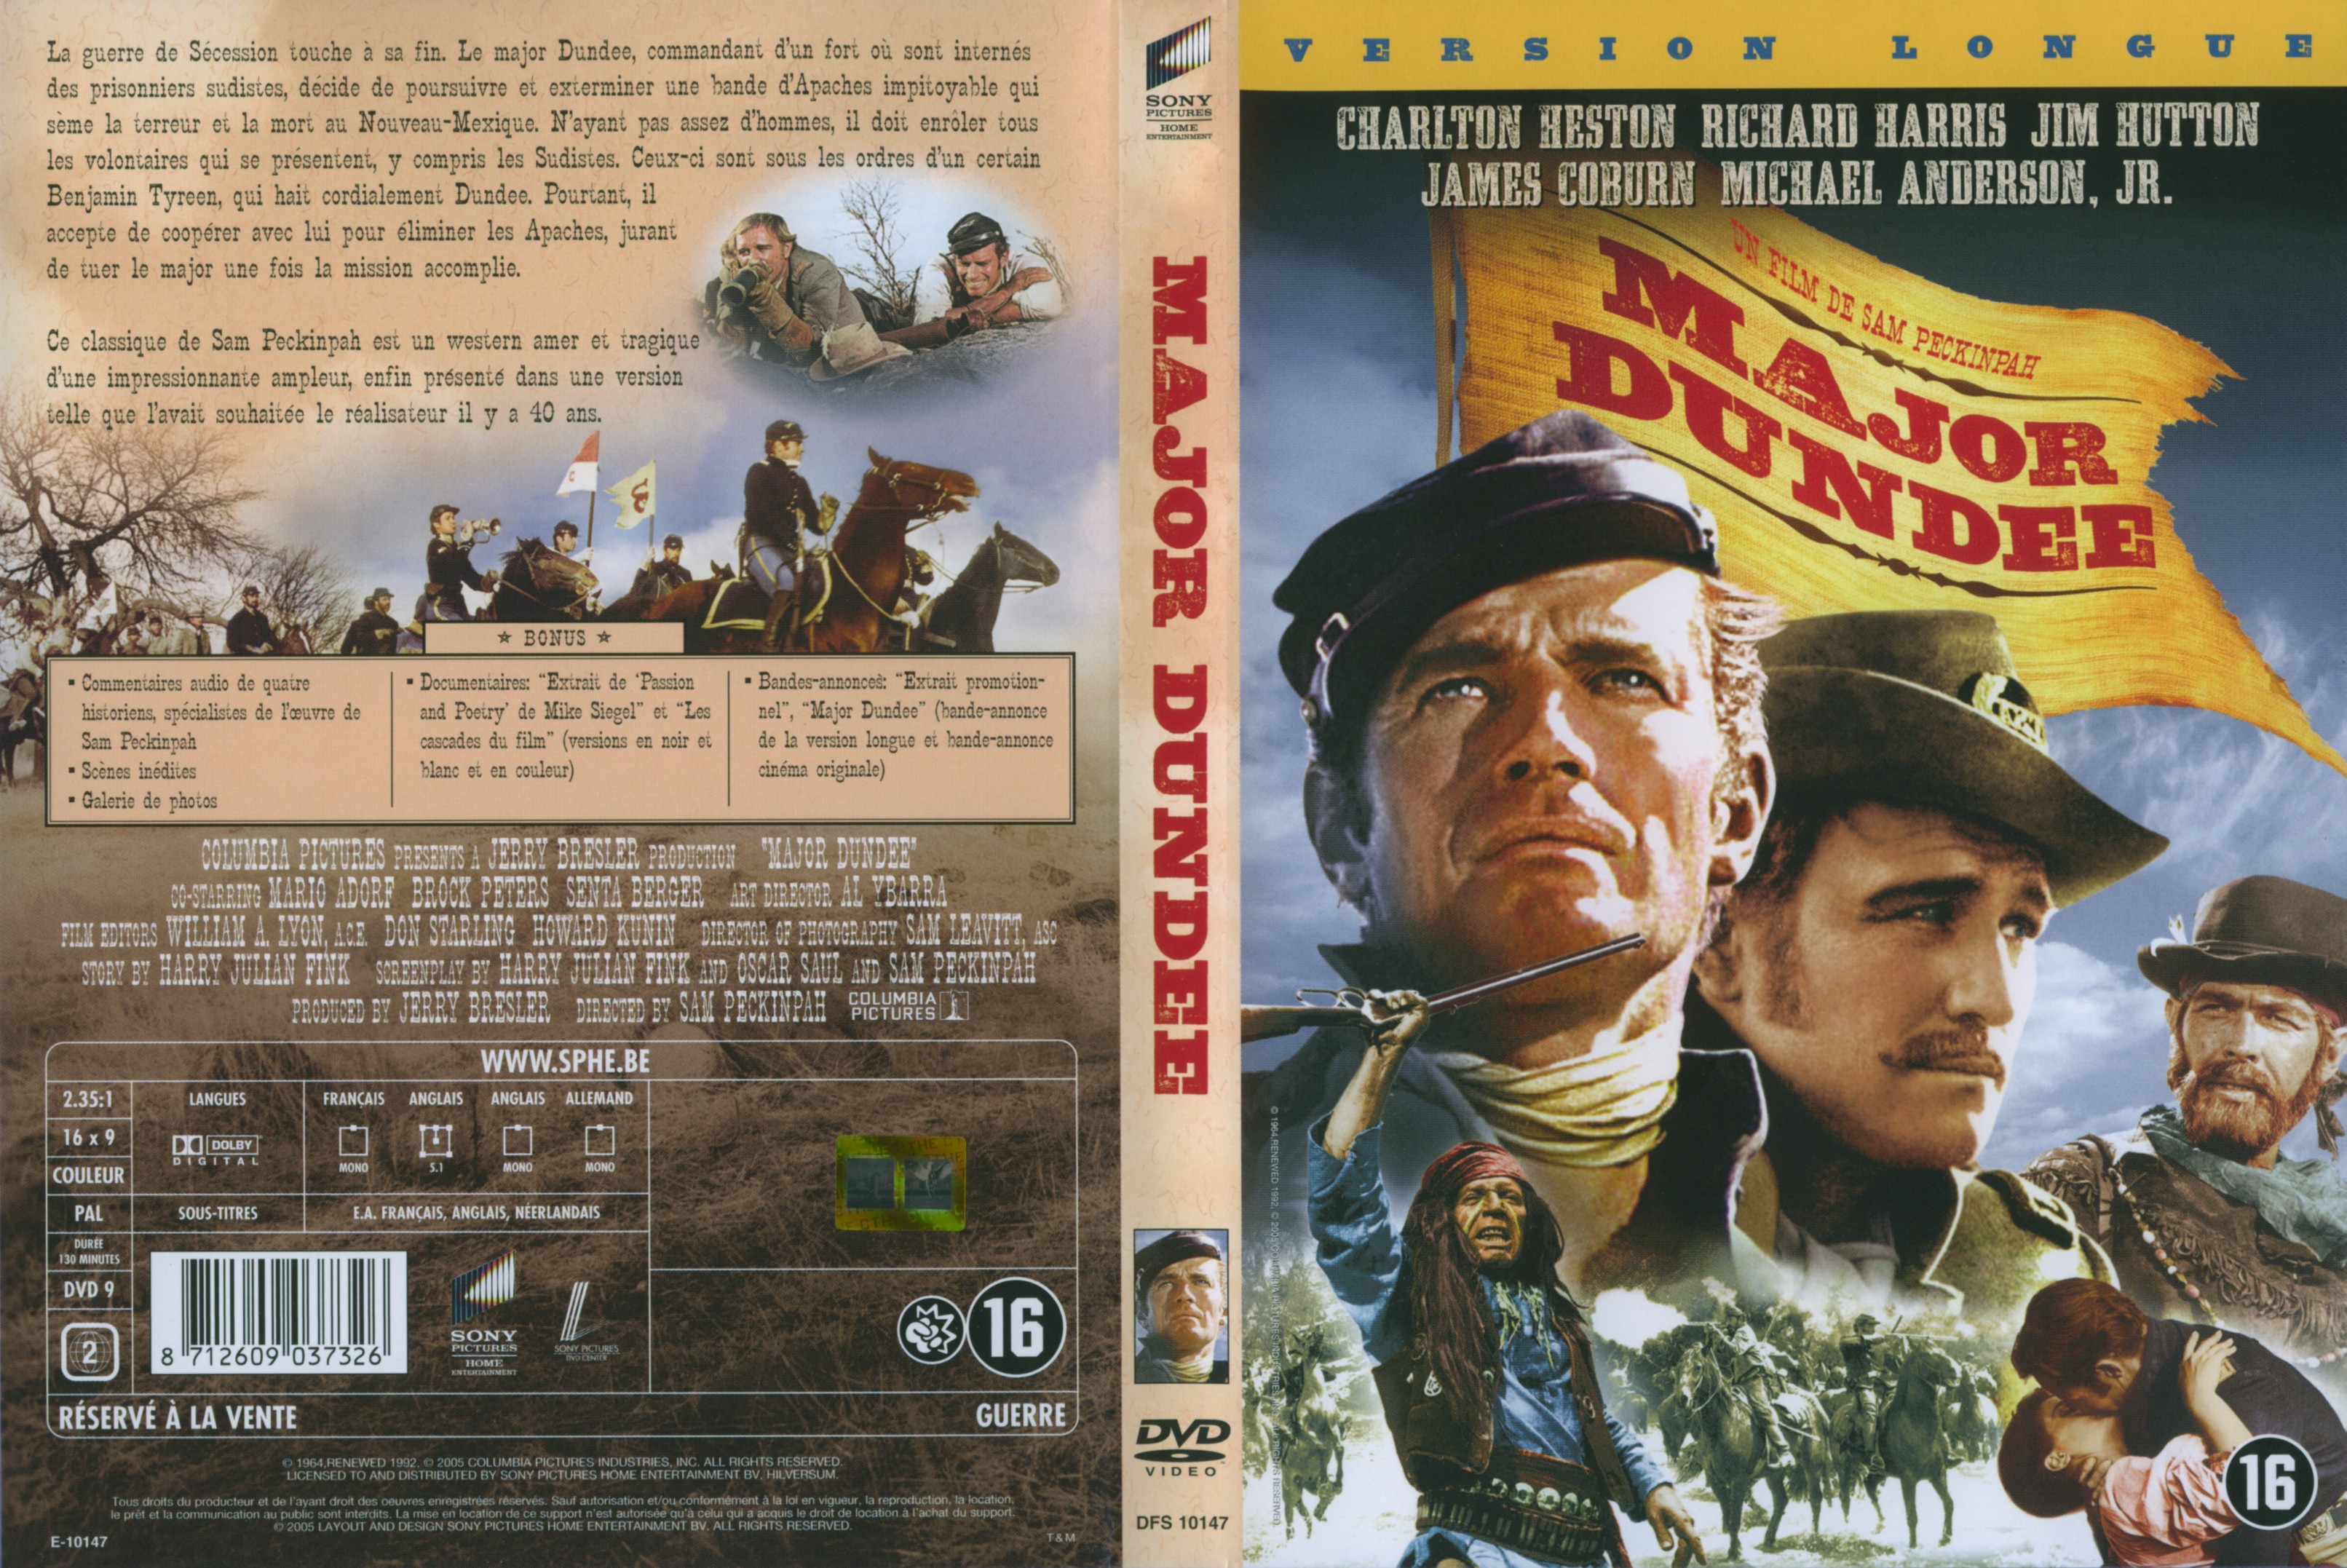 Jaquette DVD Major Dundee